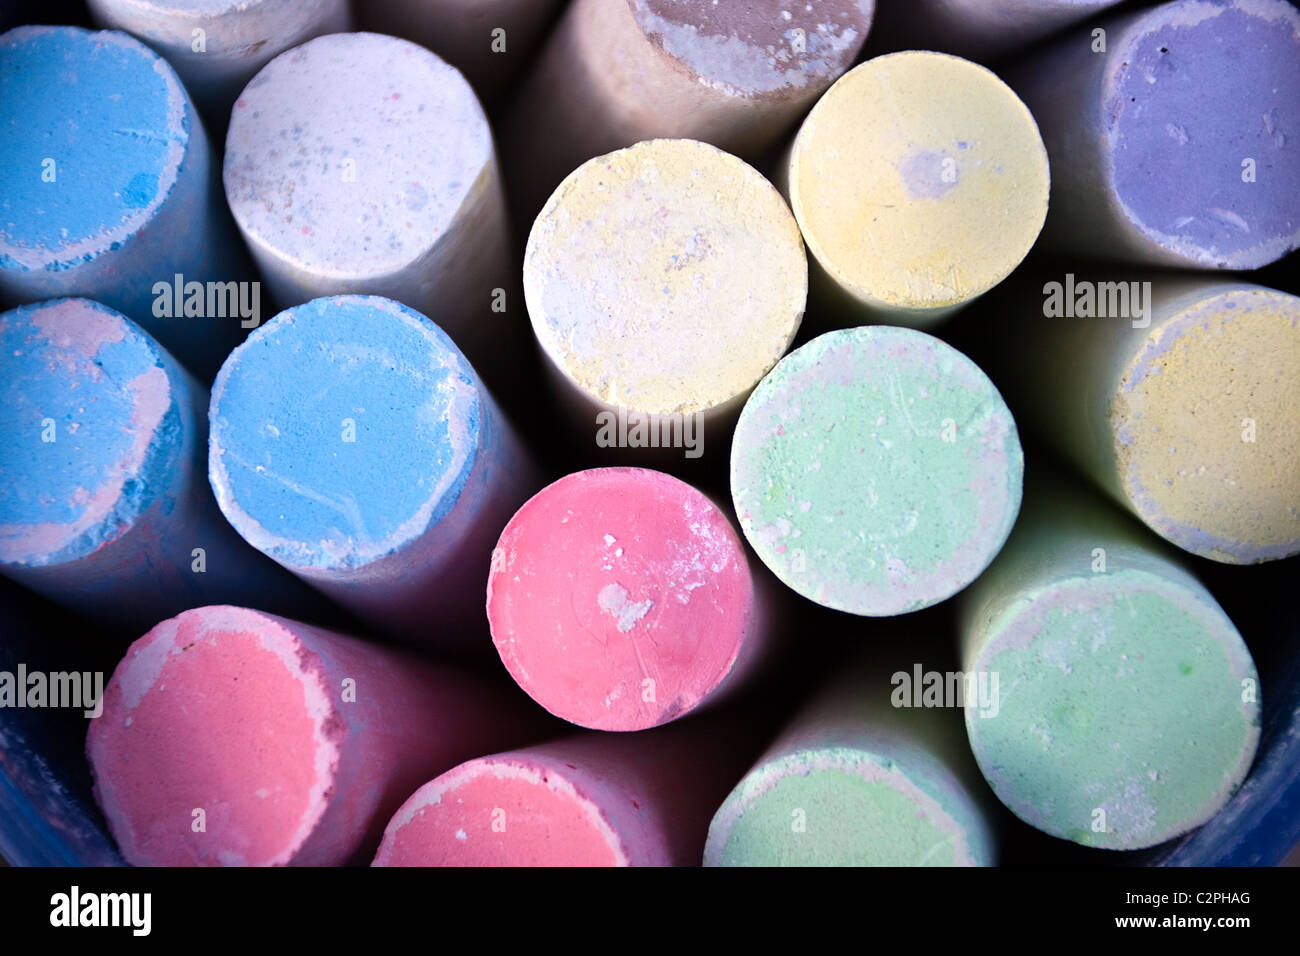 Differently colored chalk for street painting Stock Photo